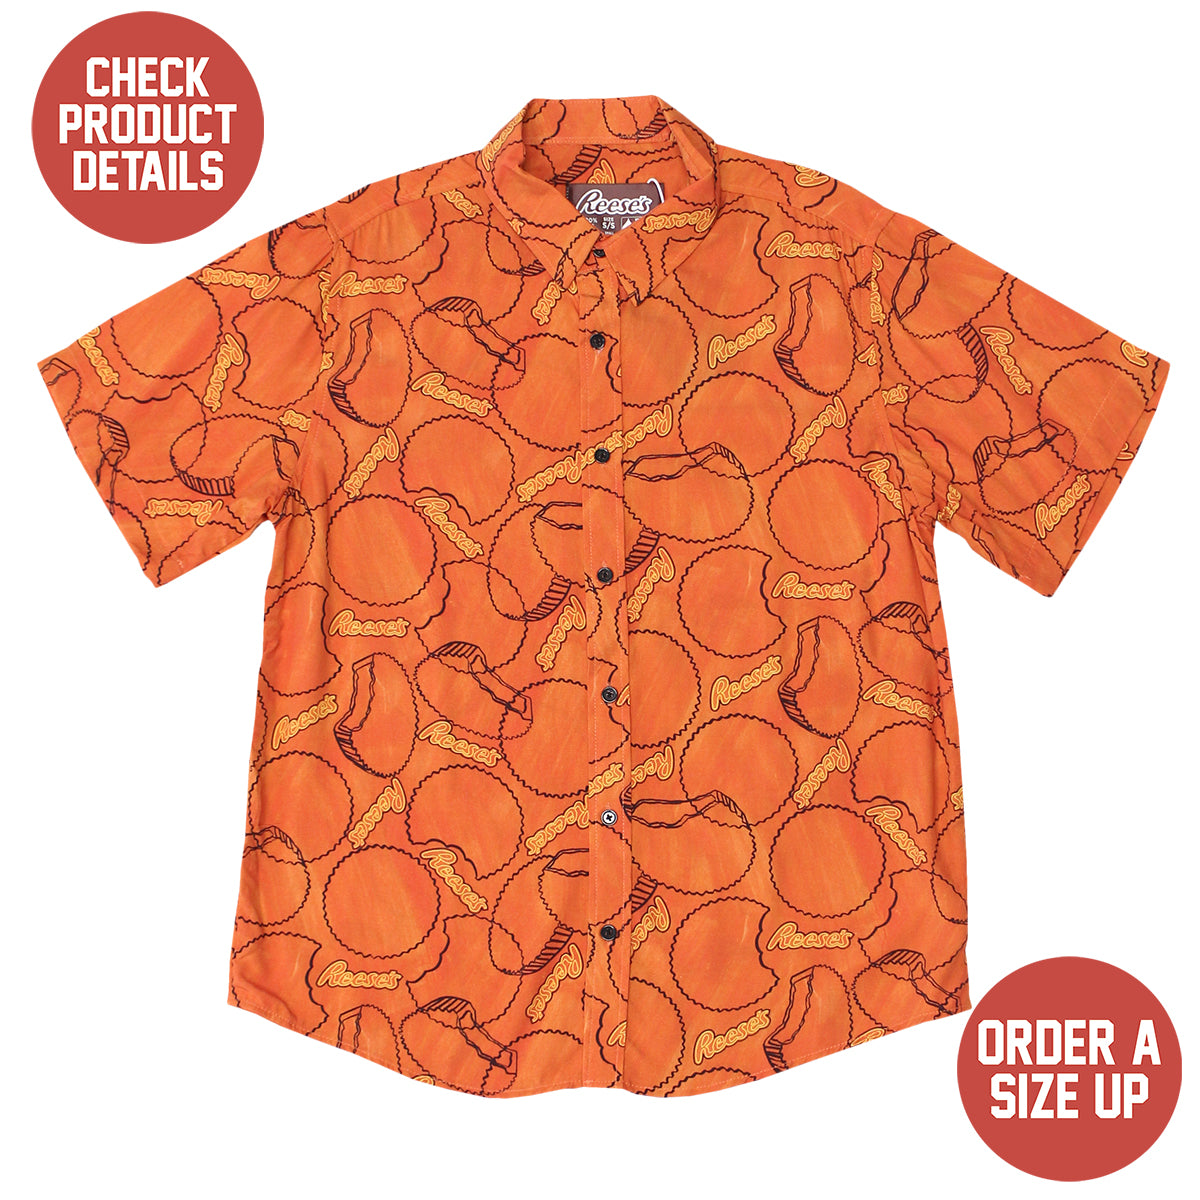 REESE'S PEANUT BUTTER CUP Silhouette Pattern (Orange) / Hawaiian Shirt - Route One Apparel